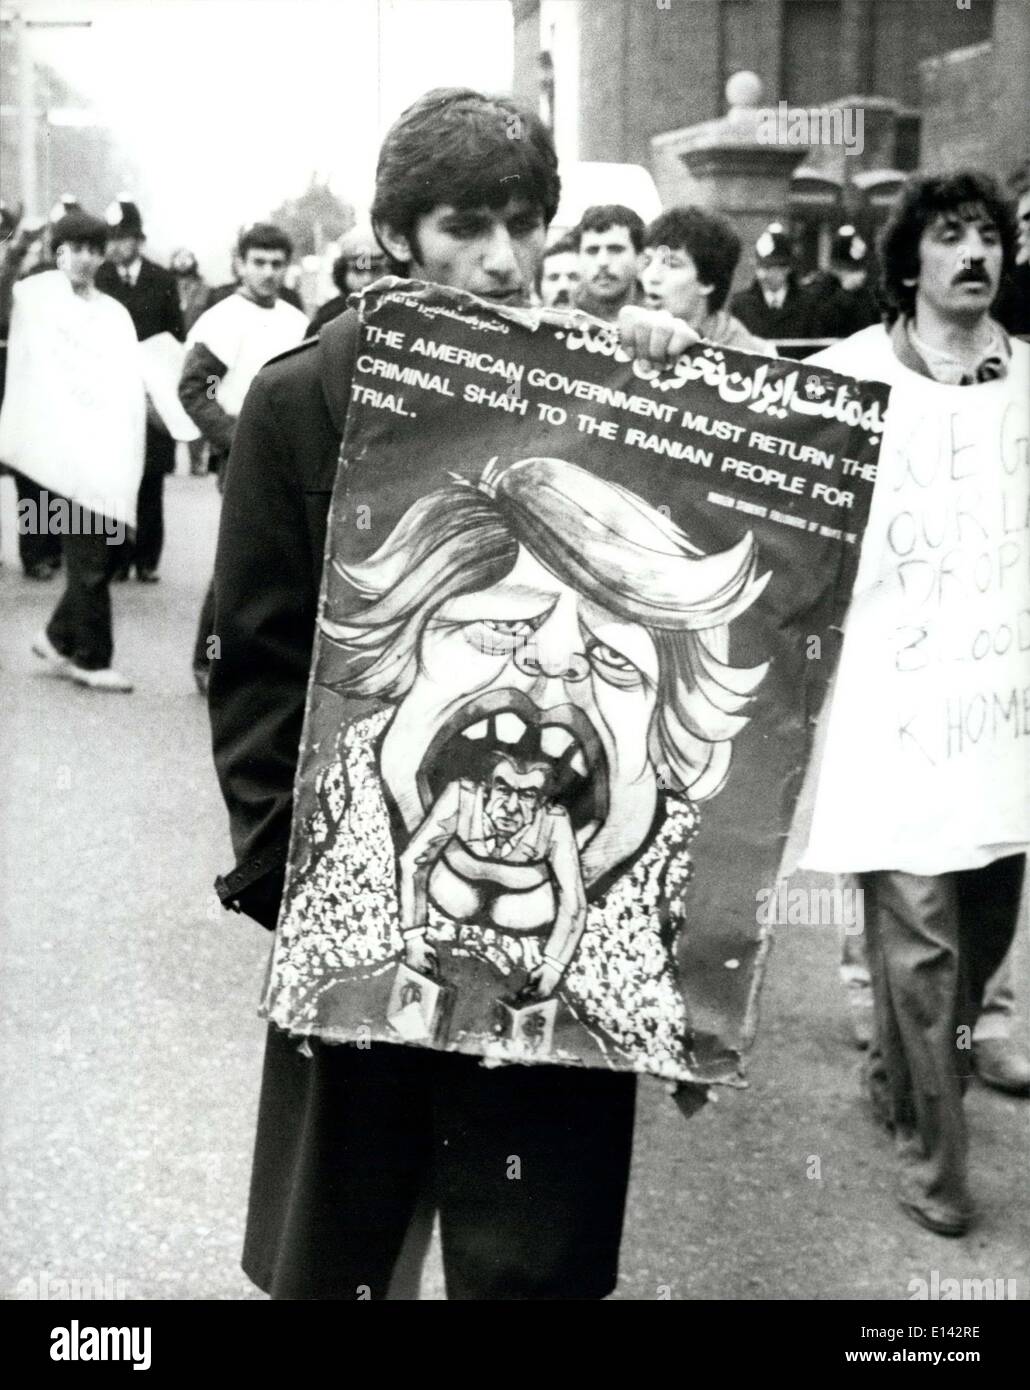 Apr. 04, 2012 - 1st May 1980 Iranian Embassy Siege A demonstrator in Kensington Gore, London, near the Iranian Embassy, carrying a poster caricaturing President Carter and demanding the former Shah's return to his country. This and other demonstrations appear to have no direct connection with the siege of the embassy which is now in it's second day. Stock Photo